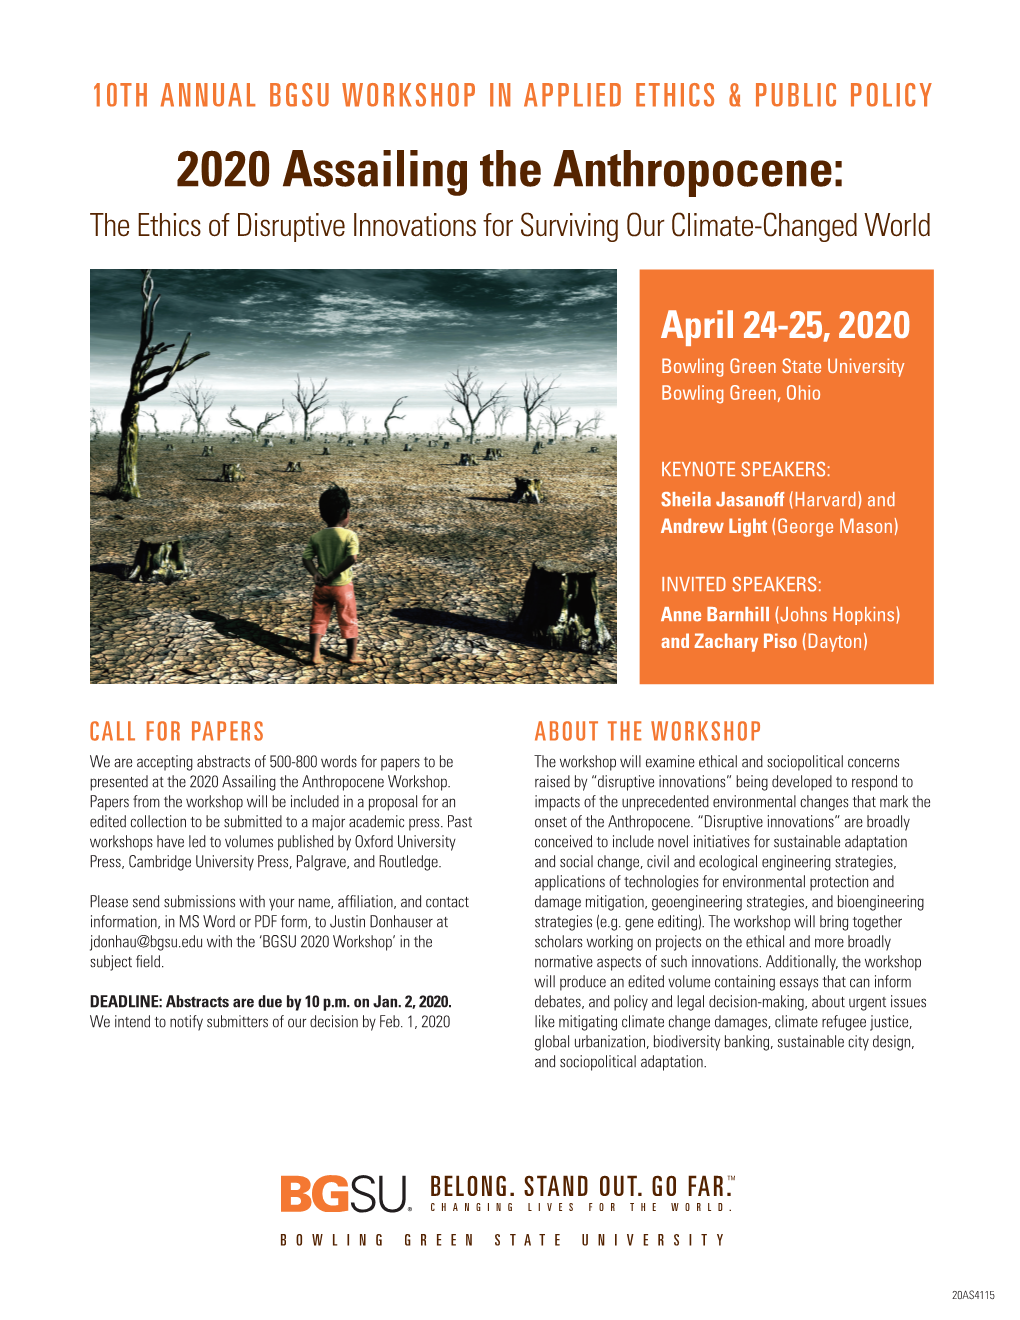 2020 Assailing the Anthropocene: the Ethics of Disruptive Innovations for Surviving Our Climate-Changed World